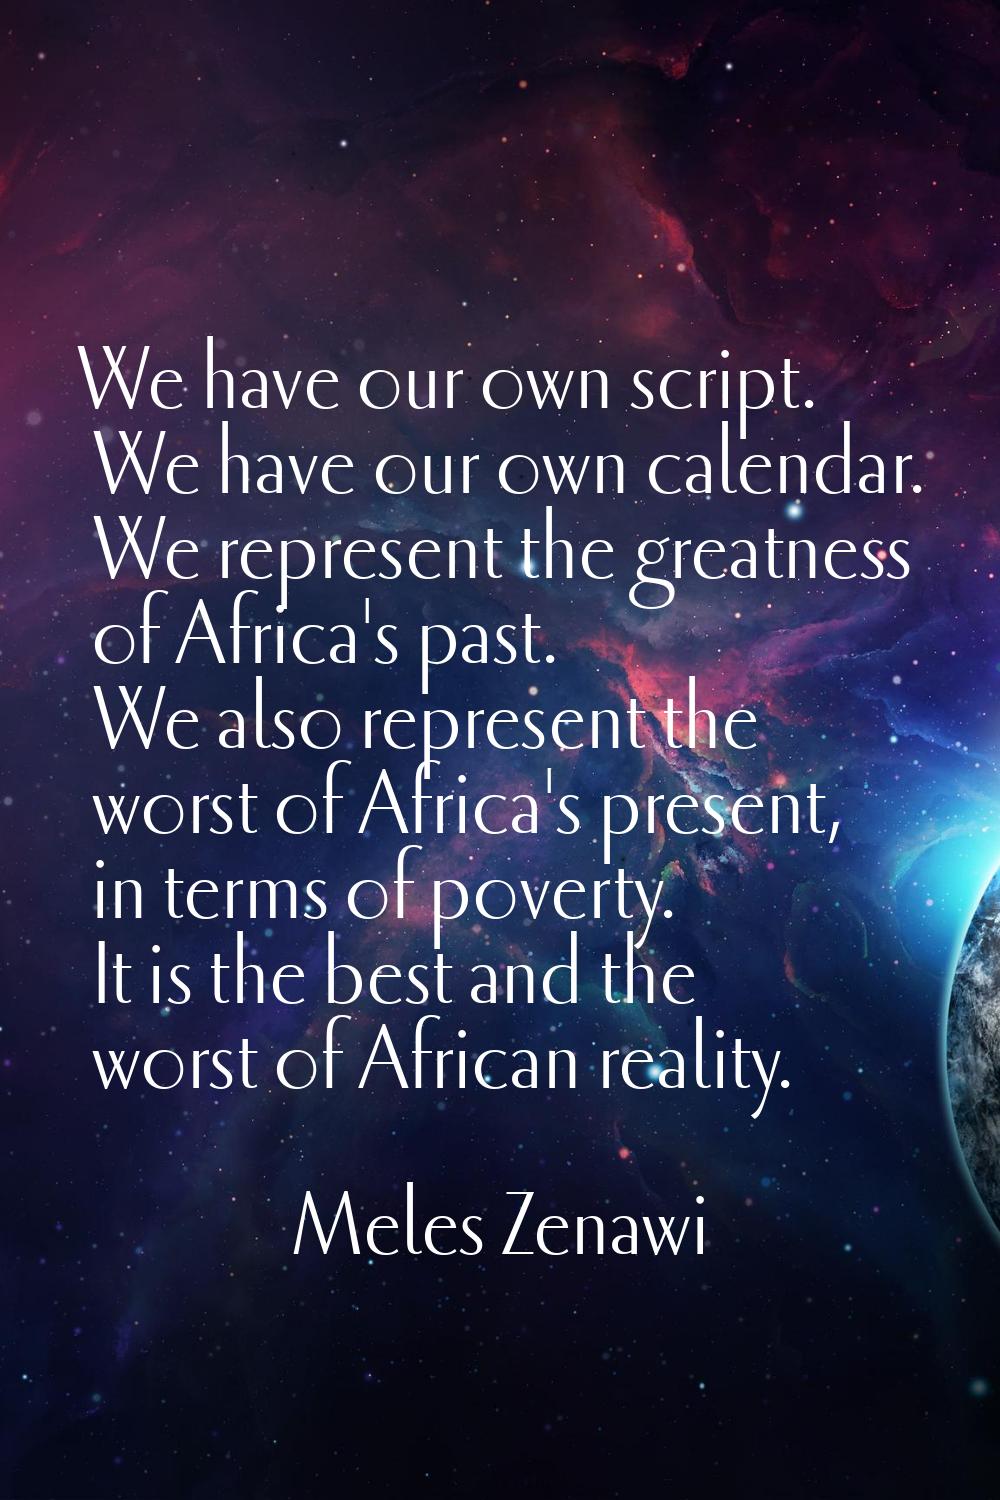 We have our own script. We have our own calendar. We represent the greatness of Africa's past. We a